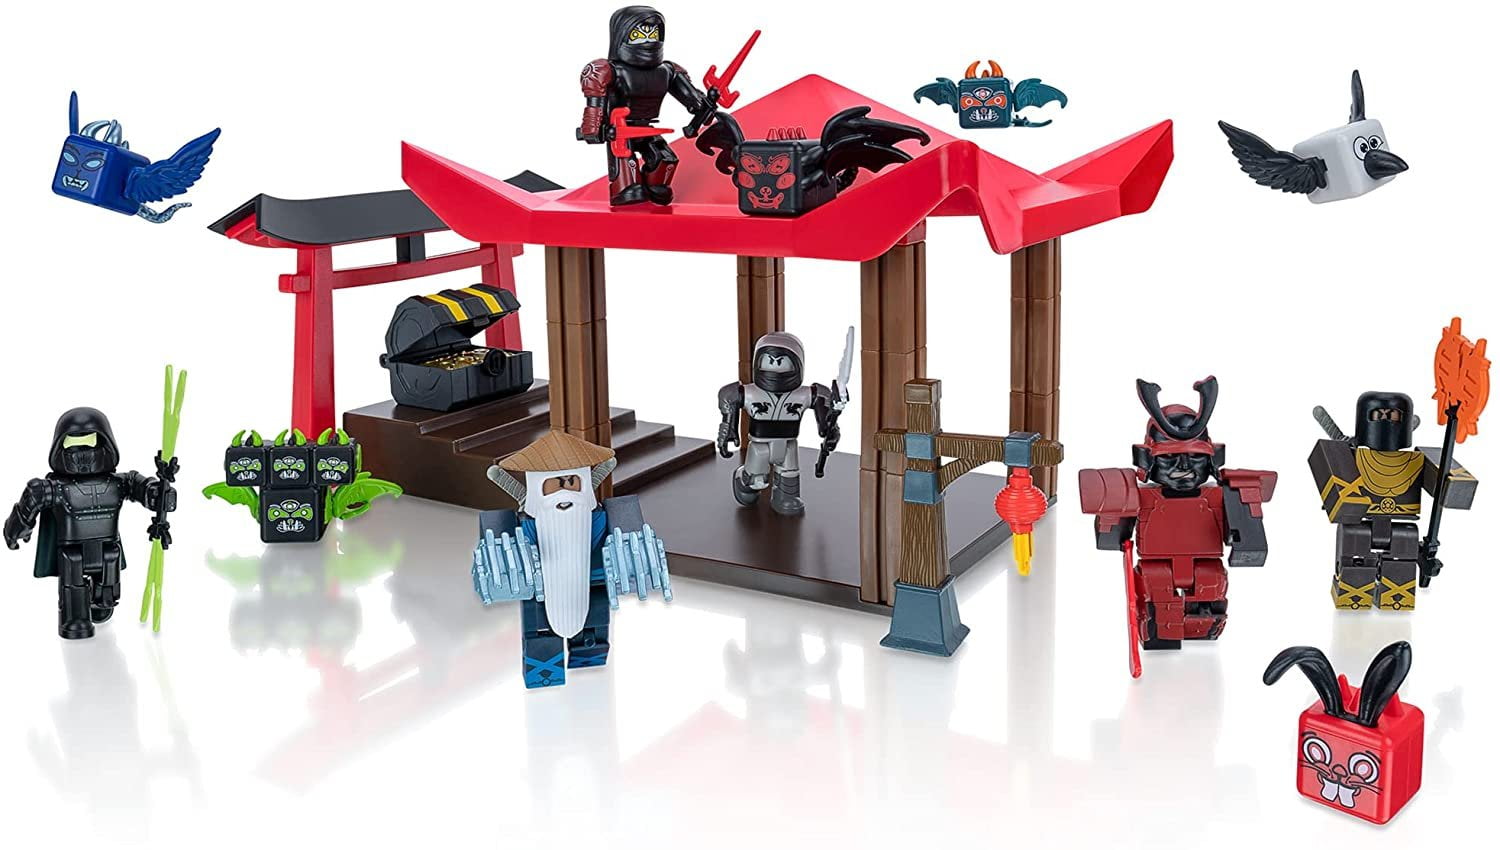 Roblox Action Collection - Tower Defense Simulator: Last Stand Playset  [Includes Exclusive Virtual Item] : Toys & Games 